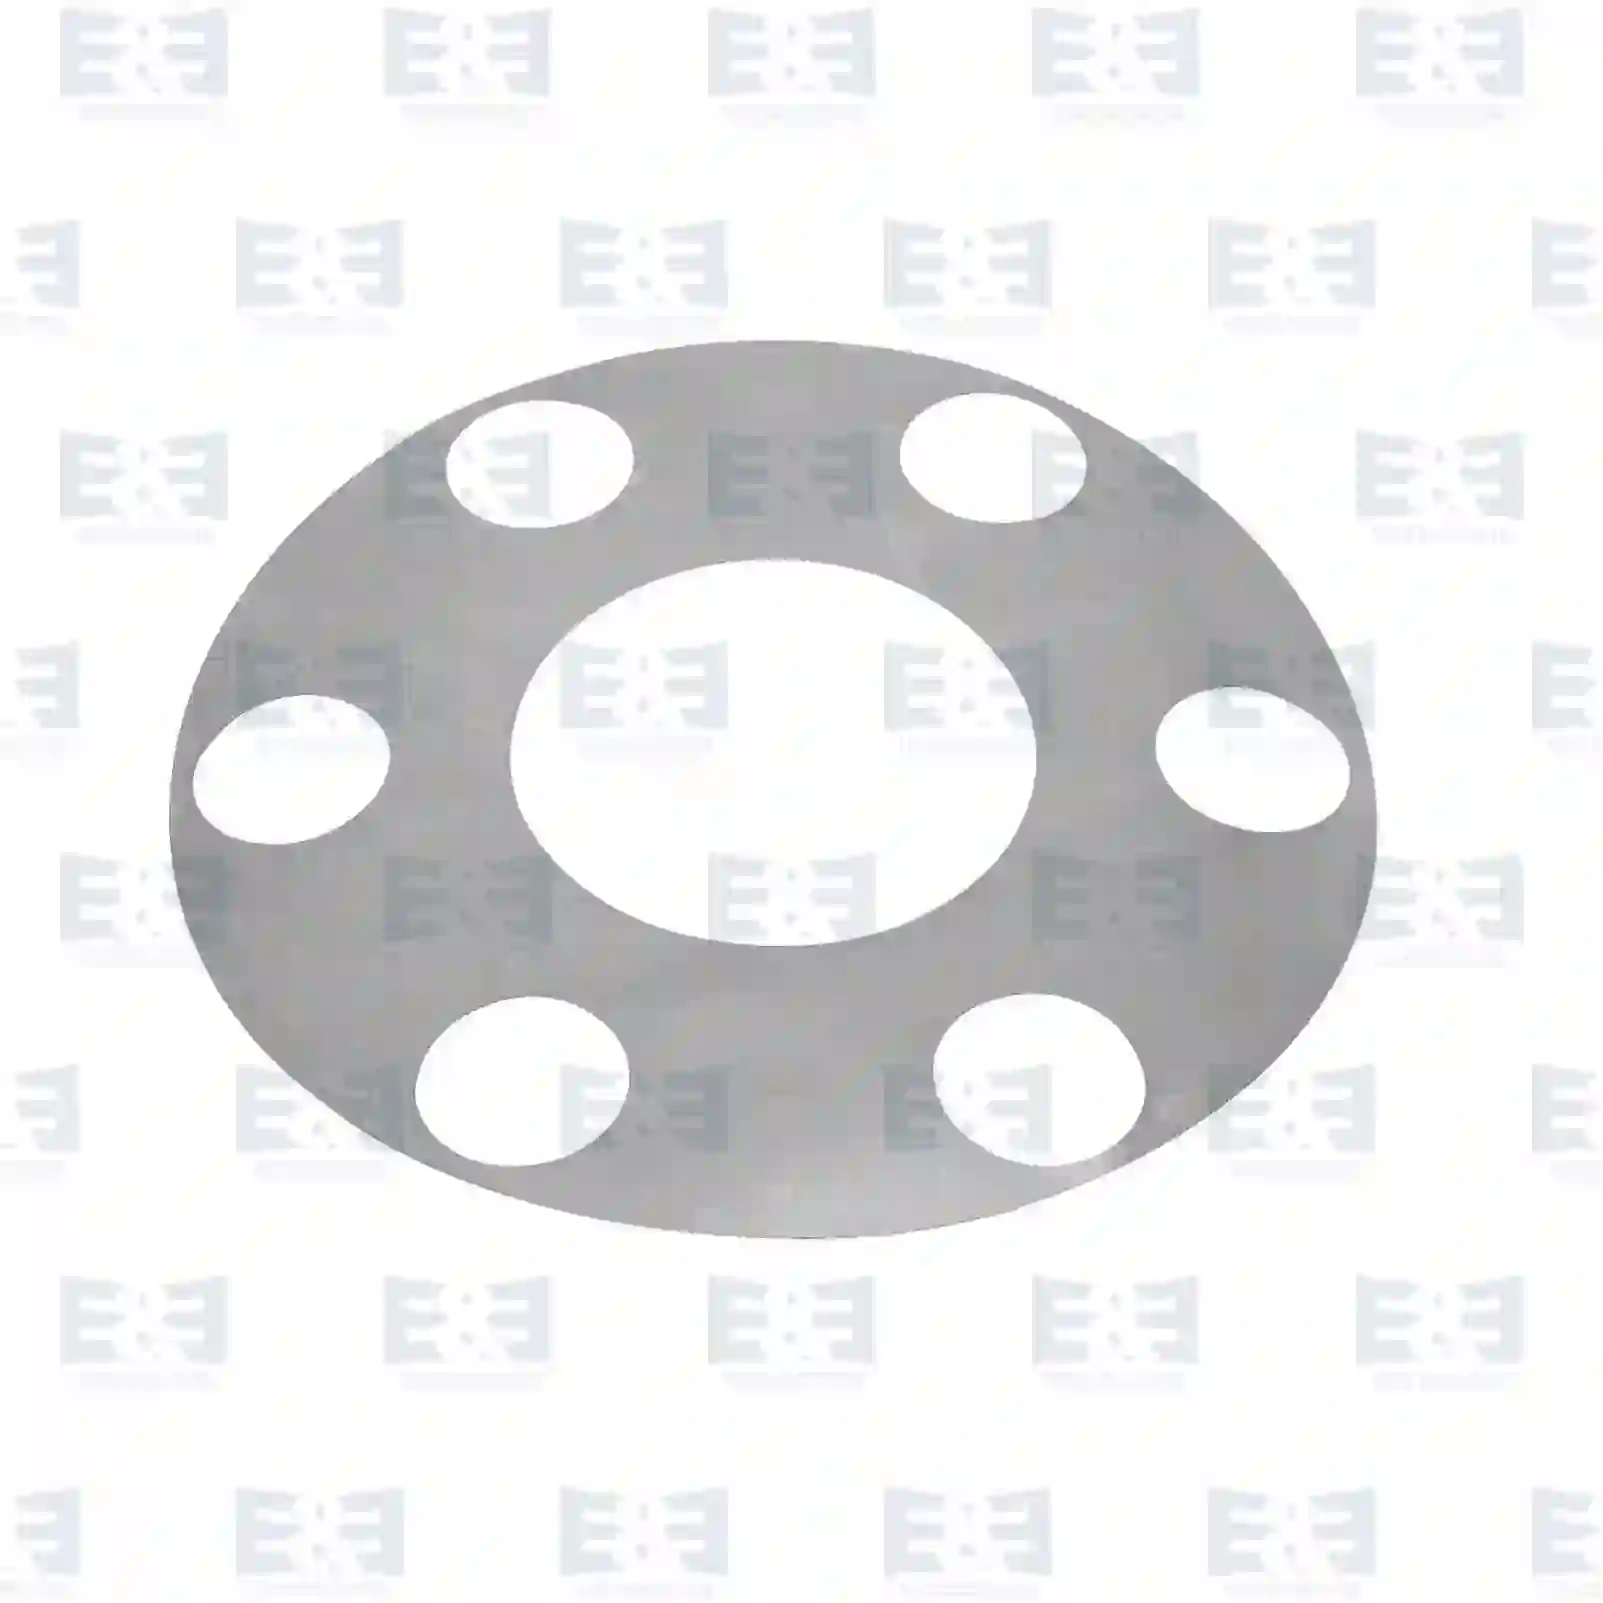 Bearing Bracket, Bogie Suspension Washer, EE No 2E2282131 ,  oem no:0000551786, , E&E Truck Spare Parts | Truck Spare Parts, Auotomotive Spare Parts